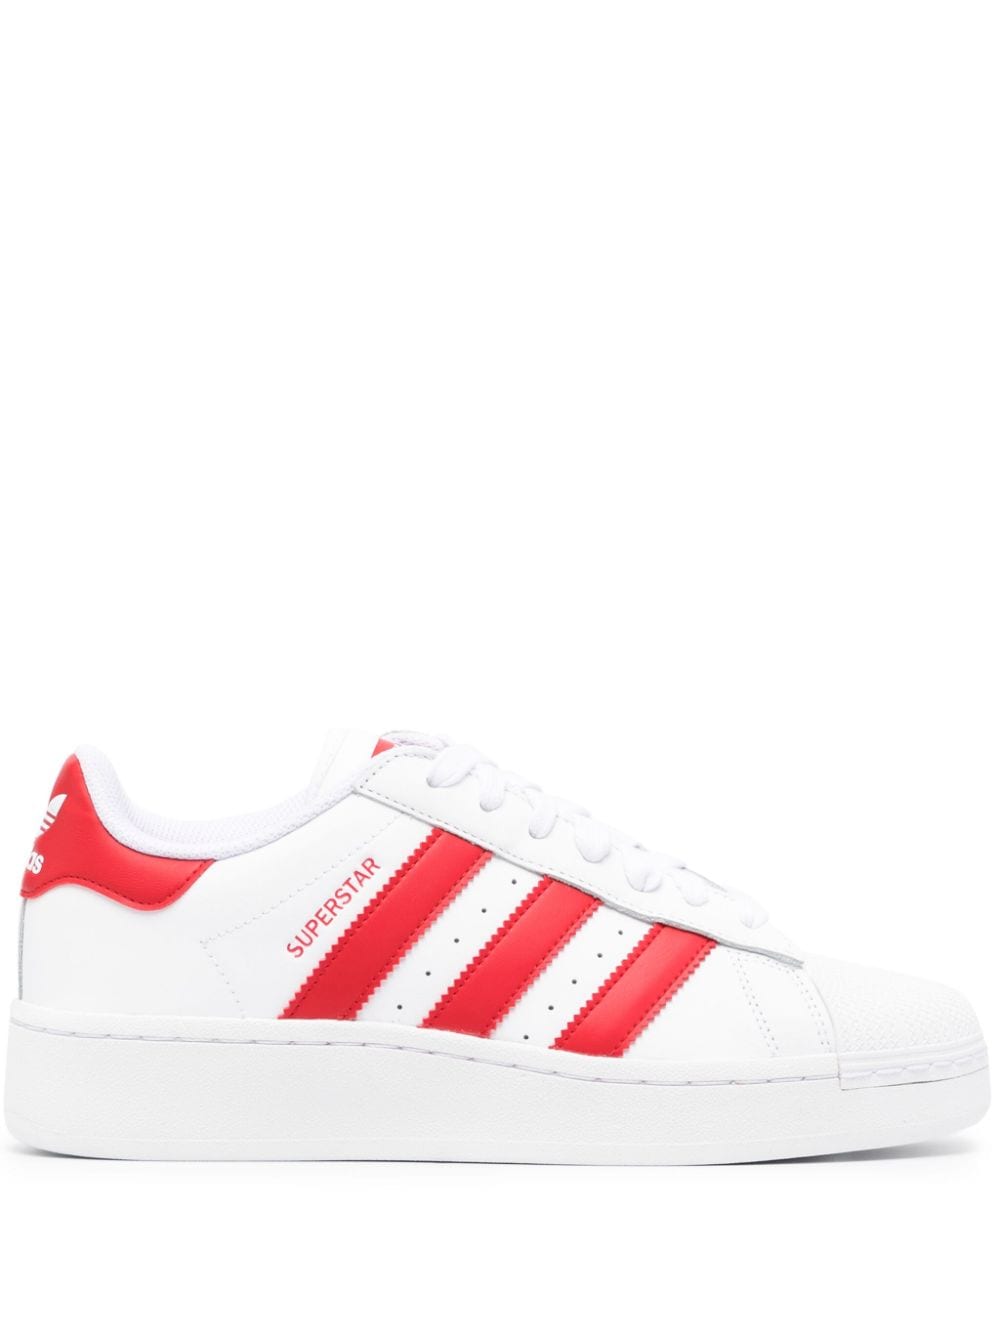 Adidas Originals Superstar Leather Sneakers In White